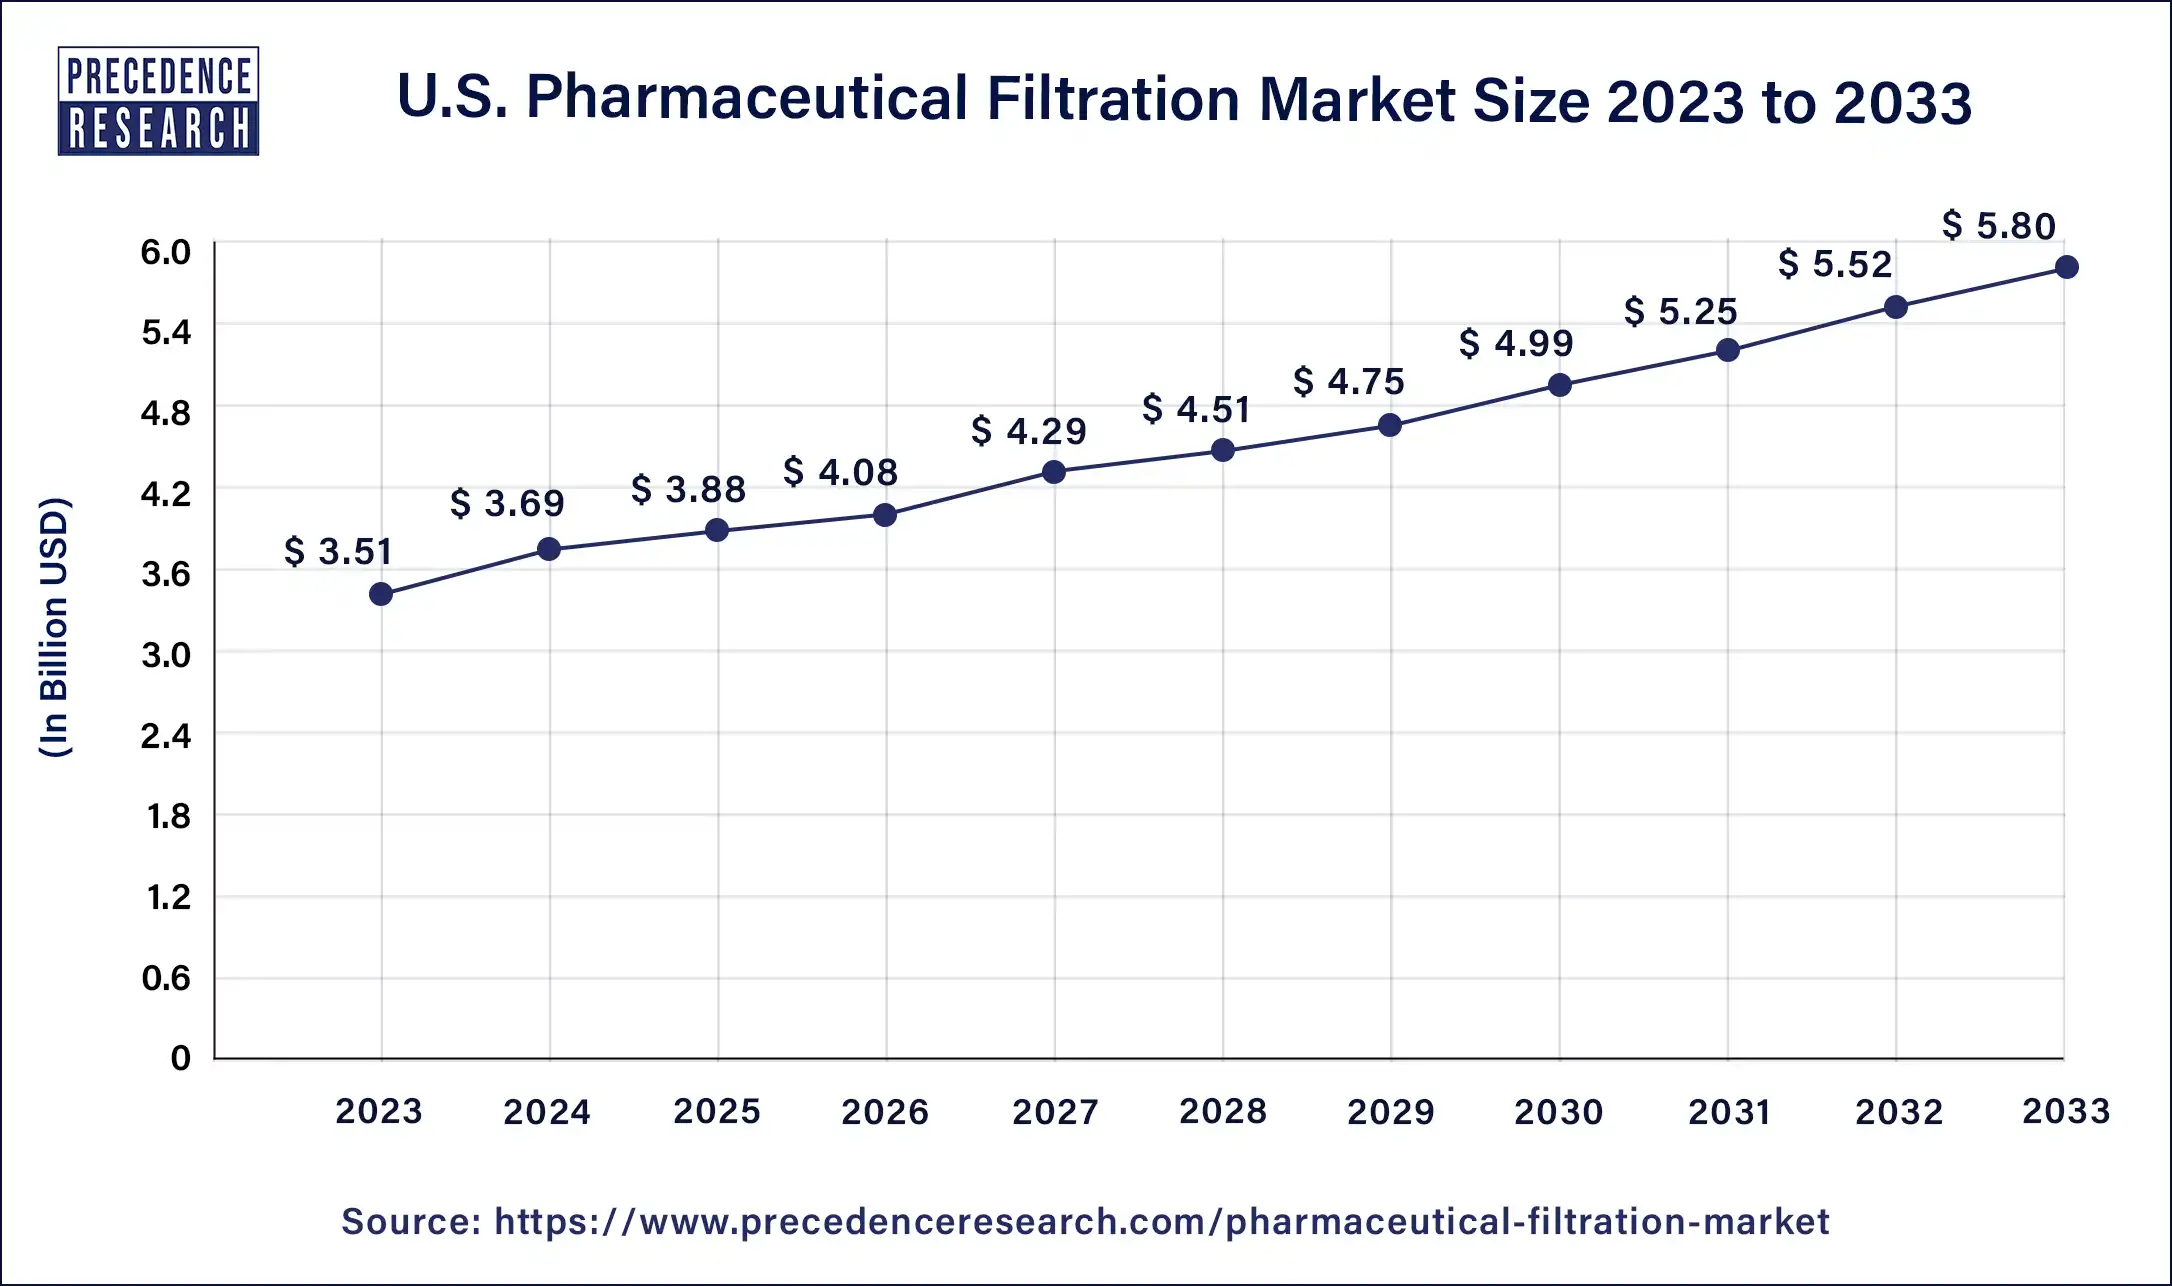 U.S. Pharmaceutical Filtration Market Size 2024 to 2033